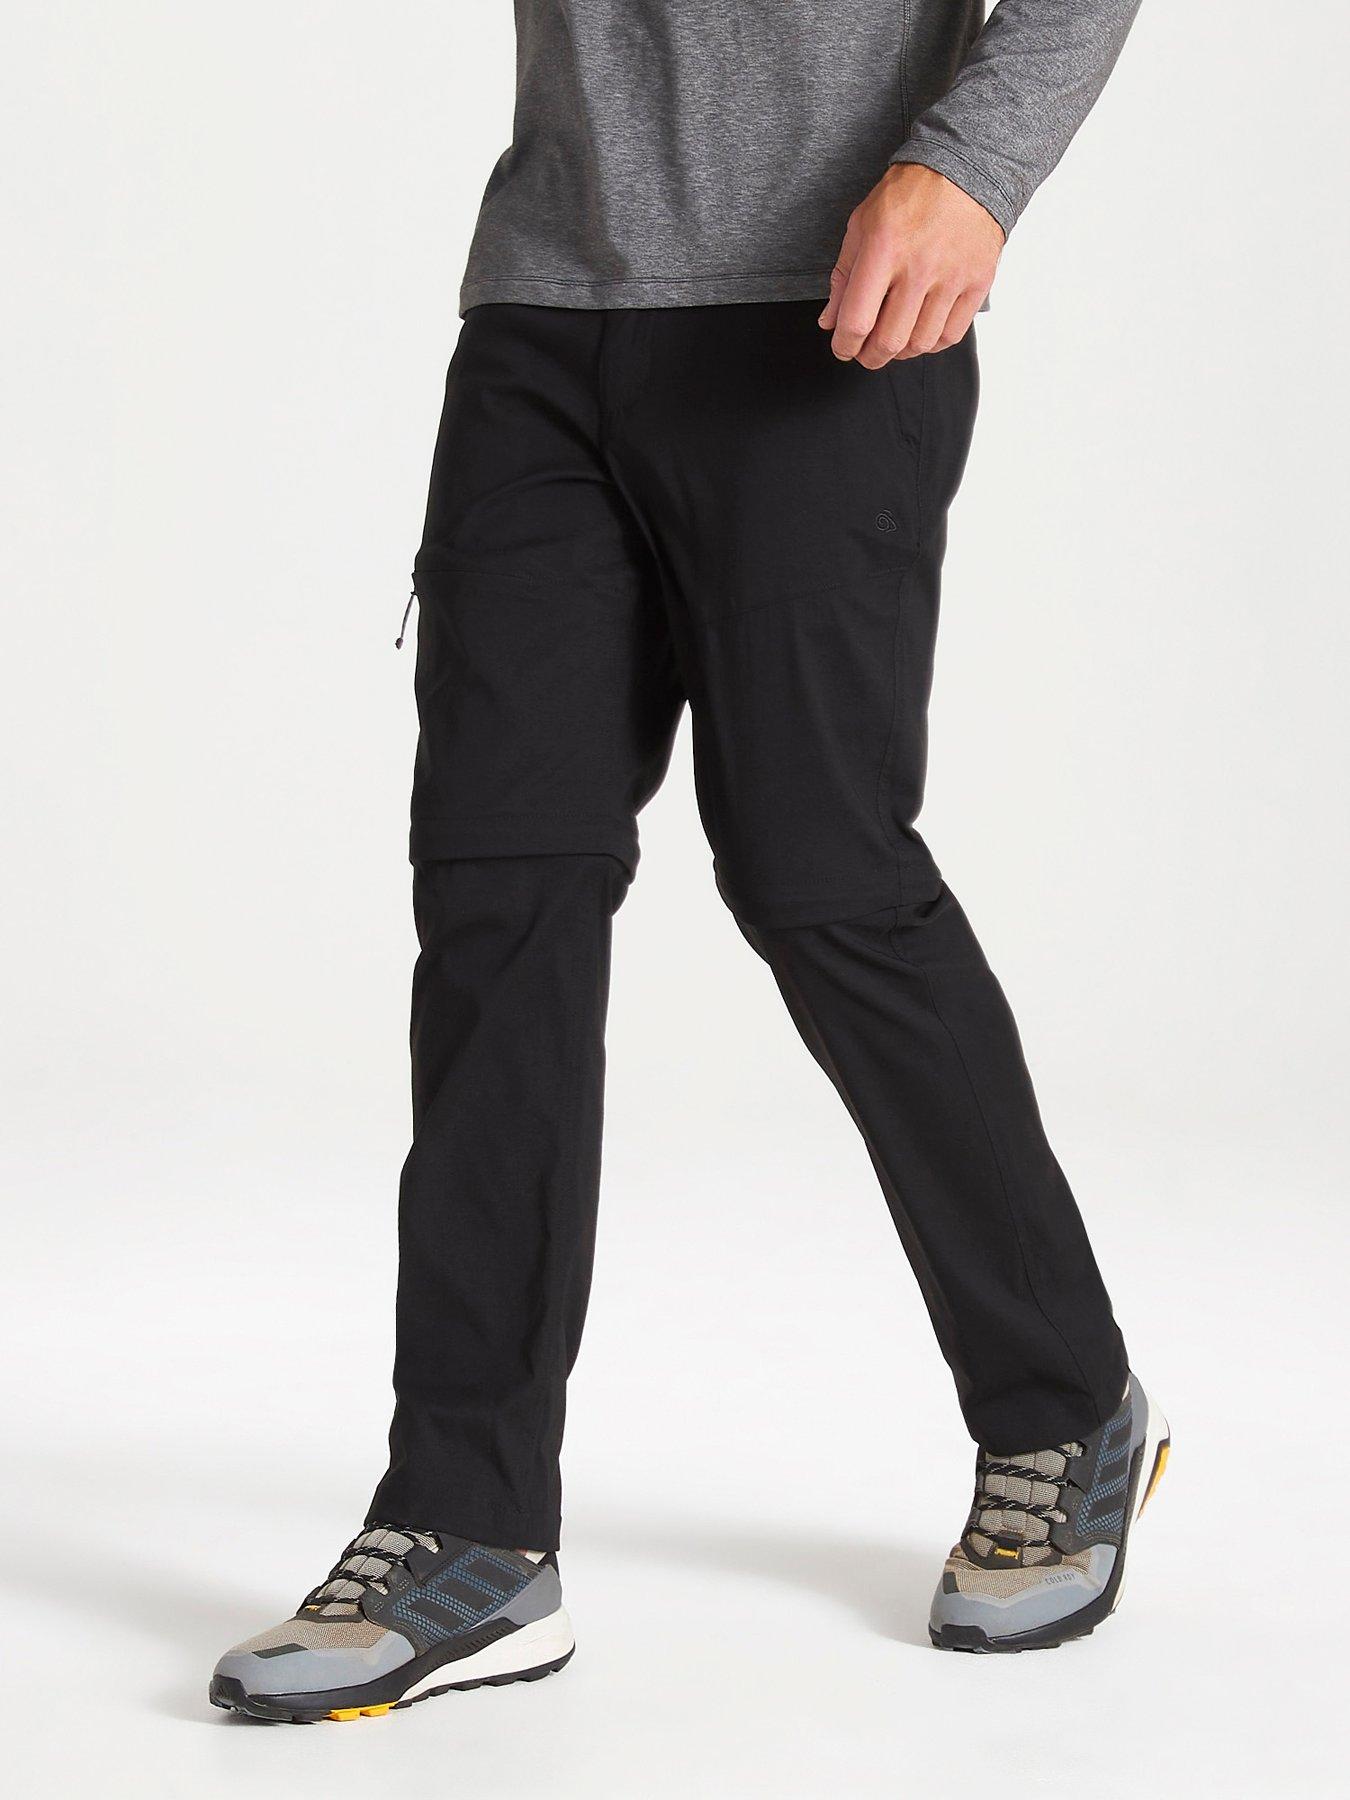 Dynamic Trousers by Craghoppers